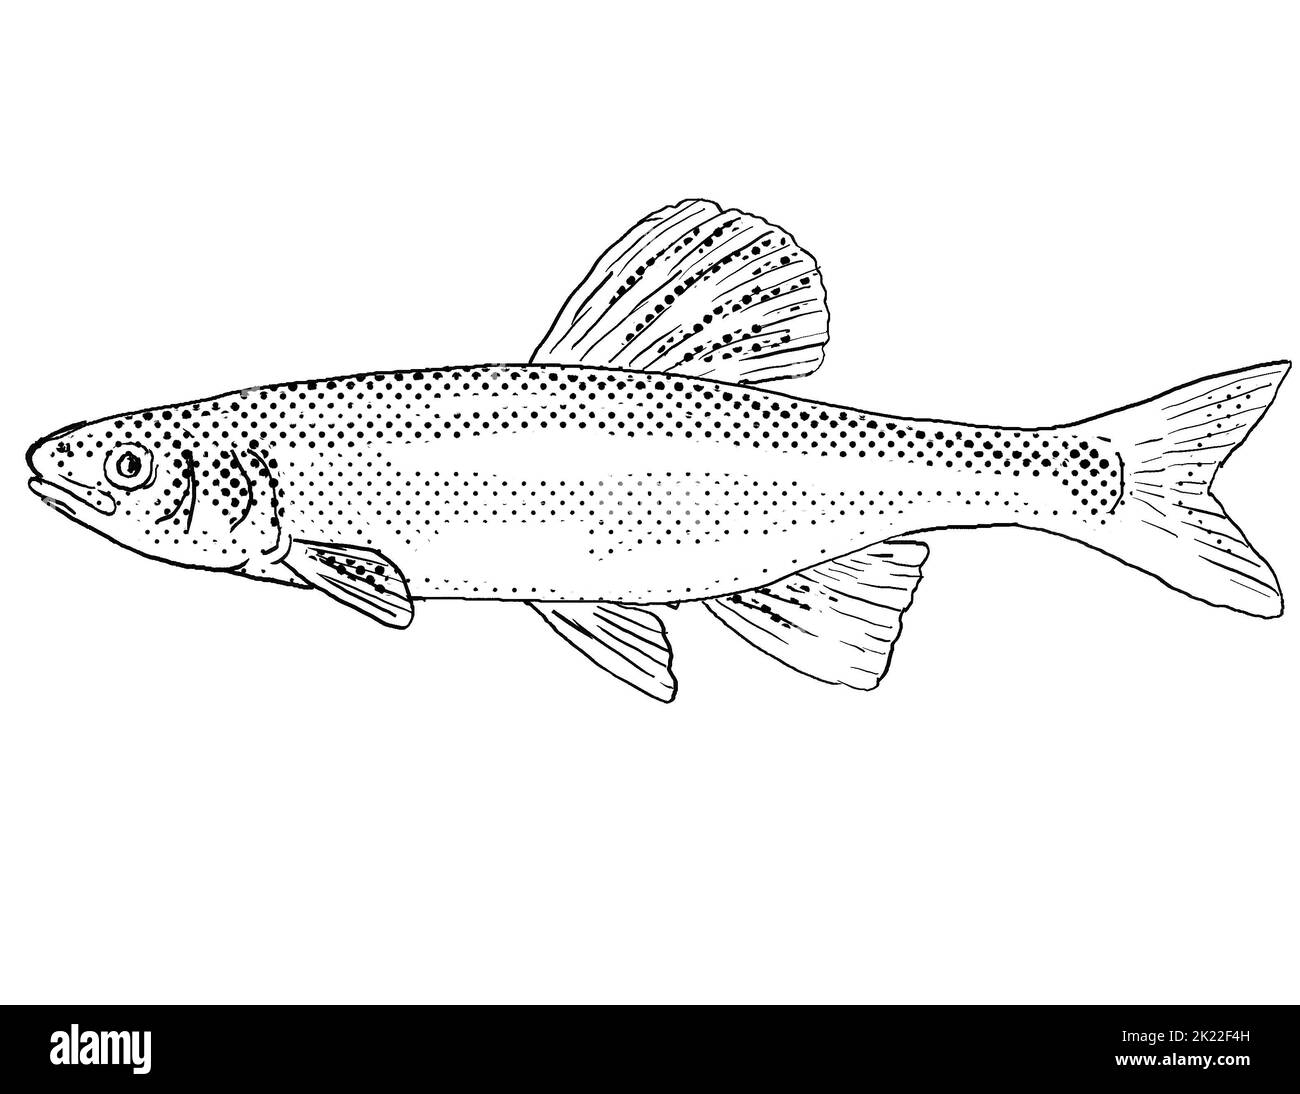 Cartoon style line drawing of a whitetail shiner or Cyprinella galactura a freshwater fish endemic to North America with halftone dots shading on isol Stock Photo